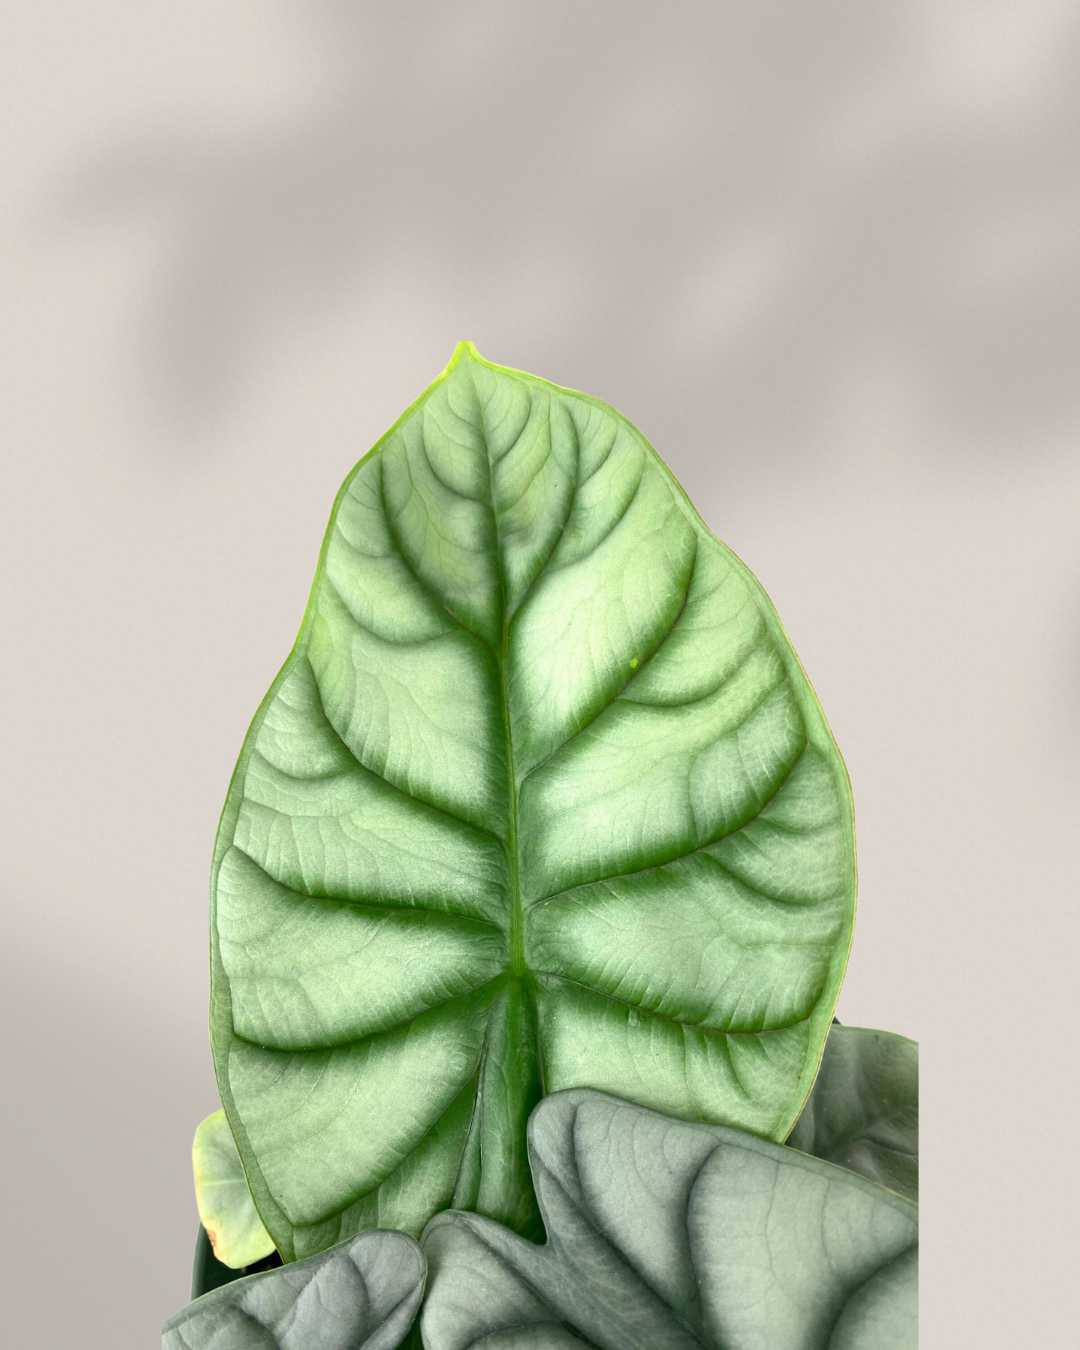 How to Take Care of Alocasia Dragon Scale